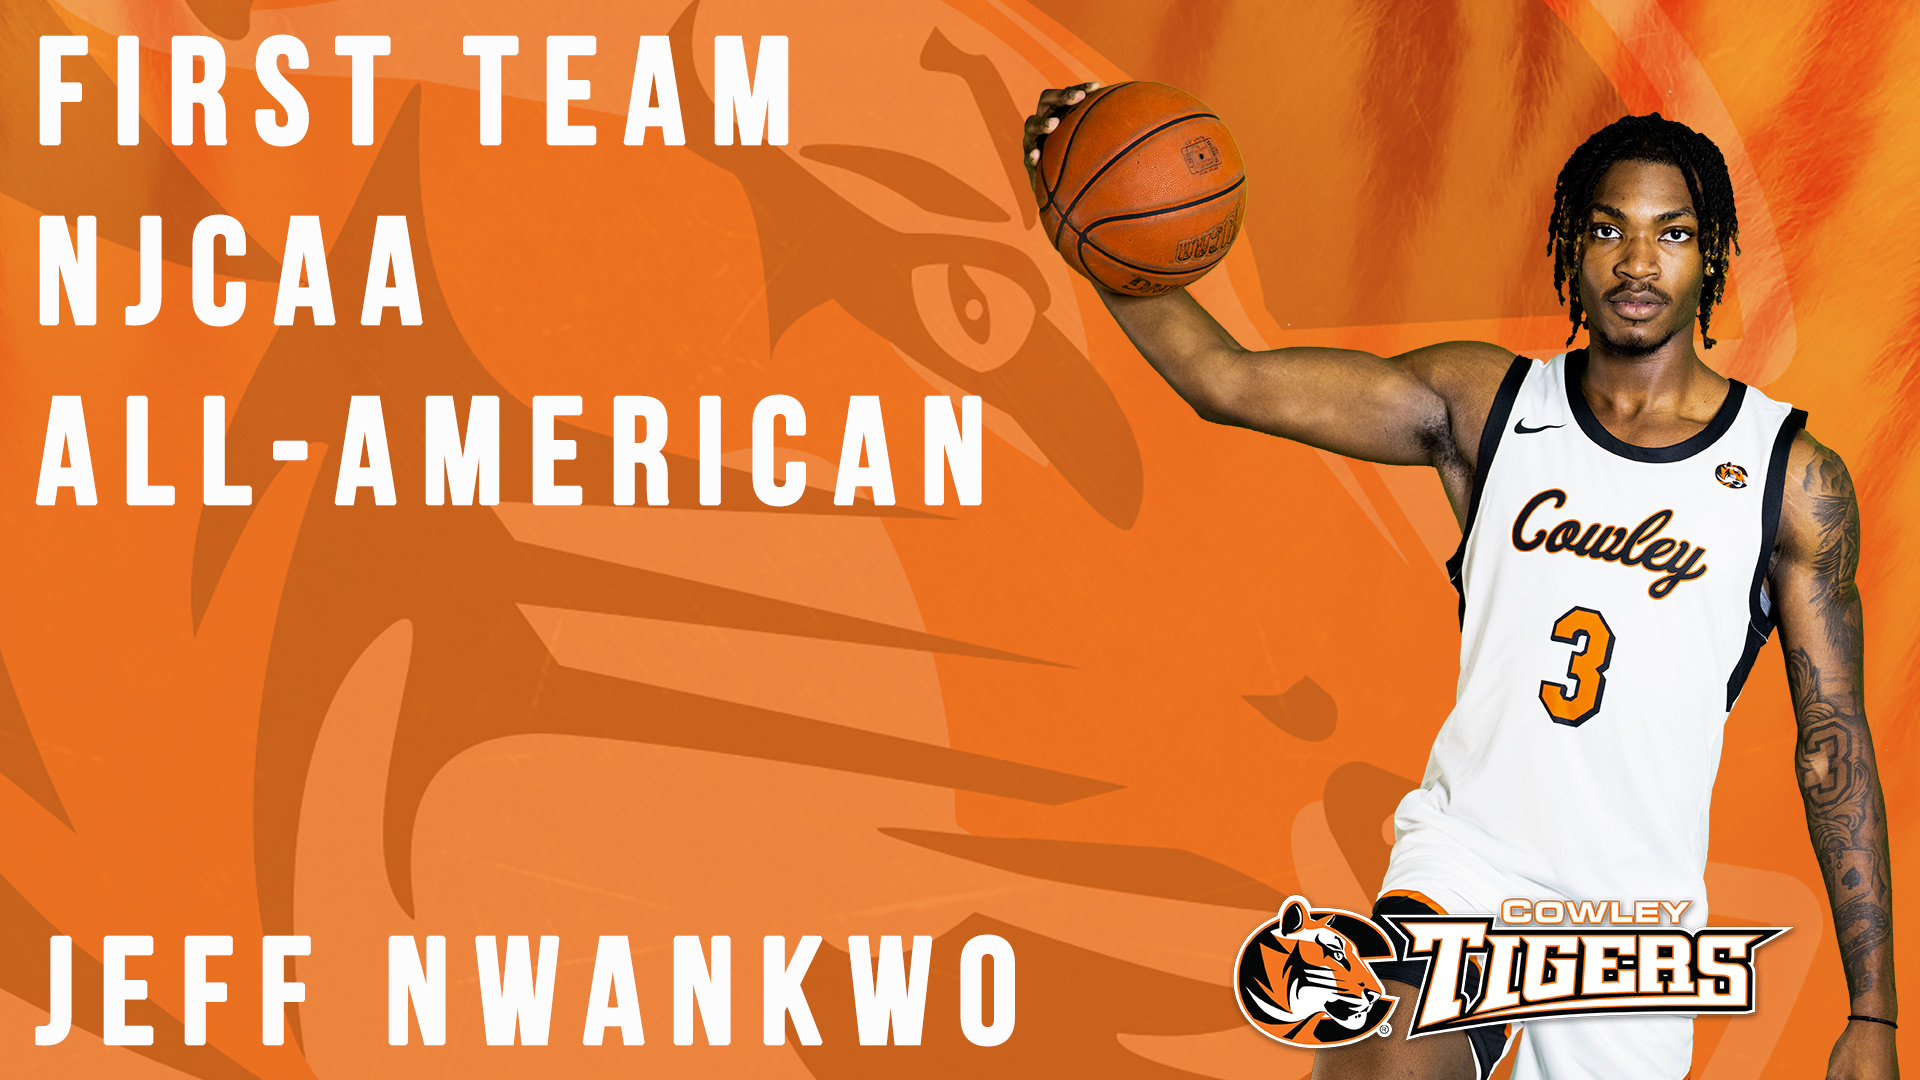 Jeff Nwankwo was recently named a First Team NJCAA All-American